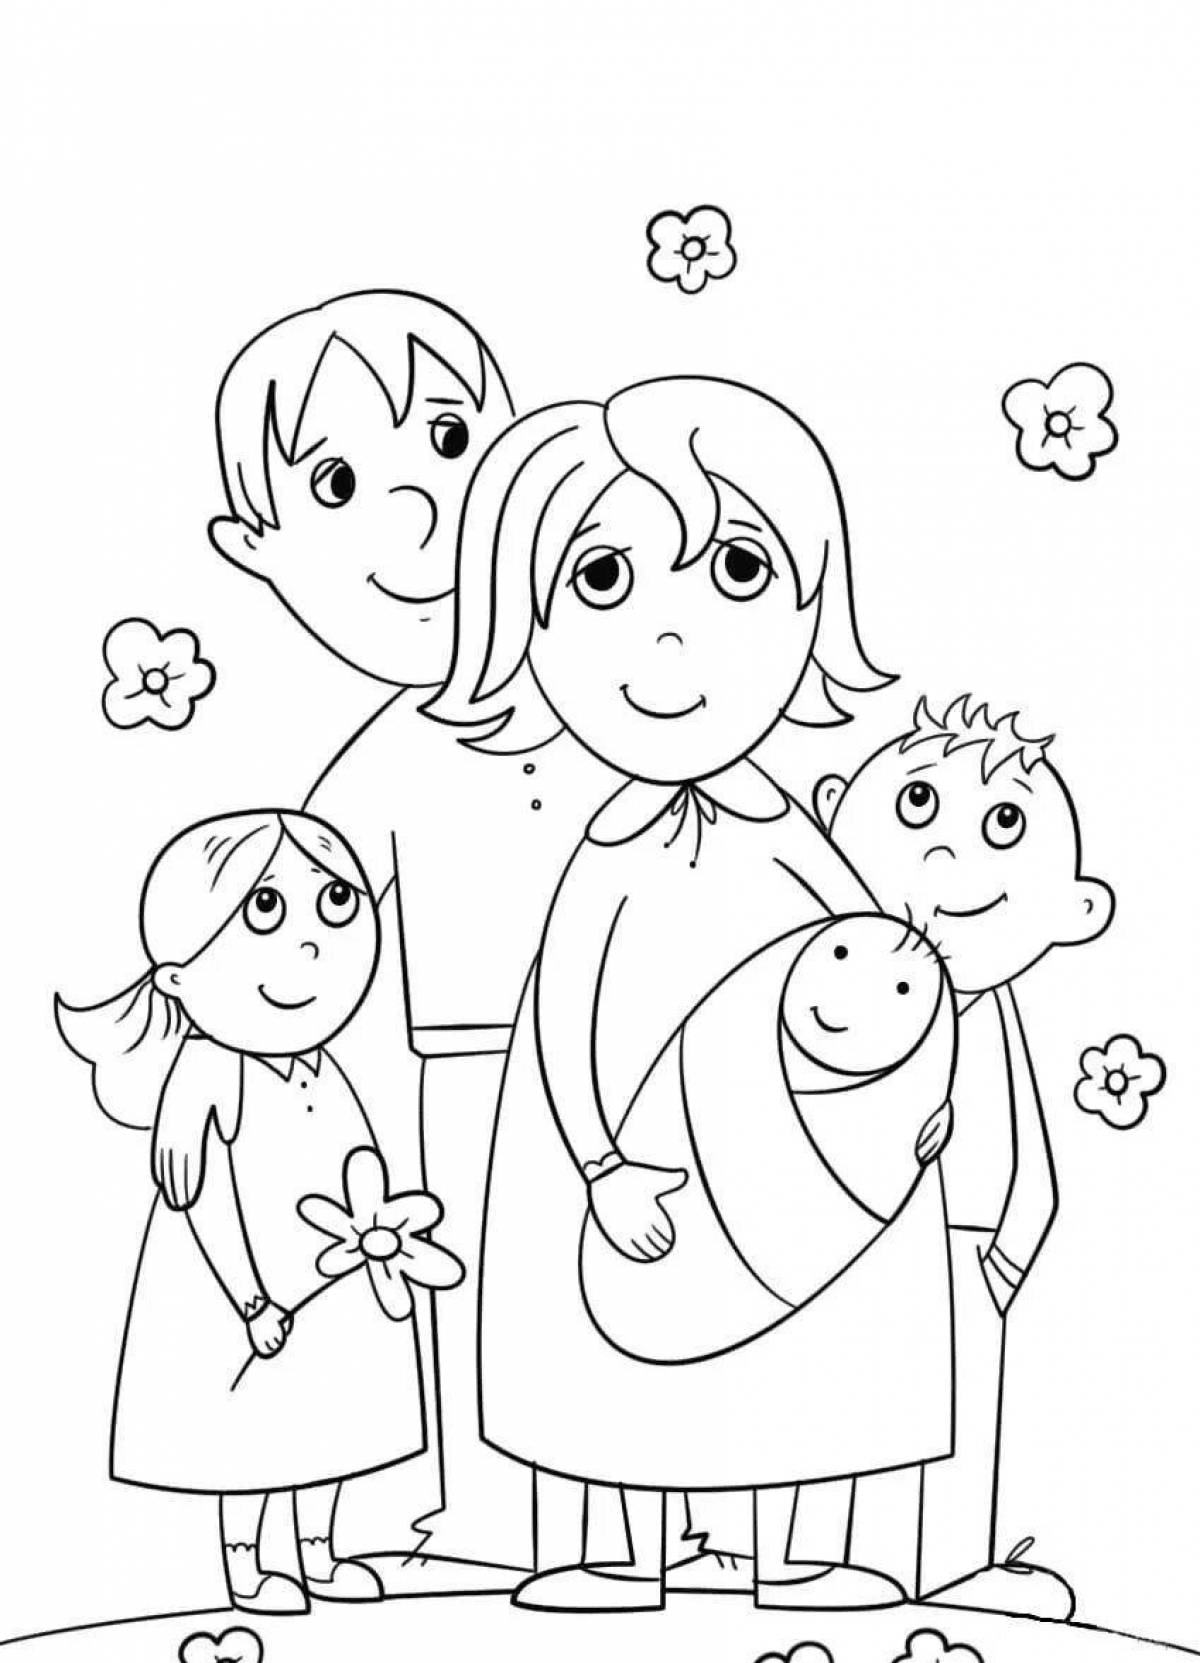 Fairytale coloring page my family